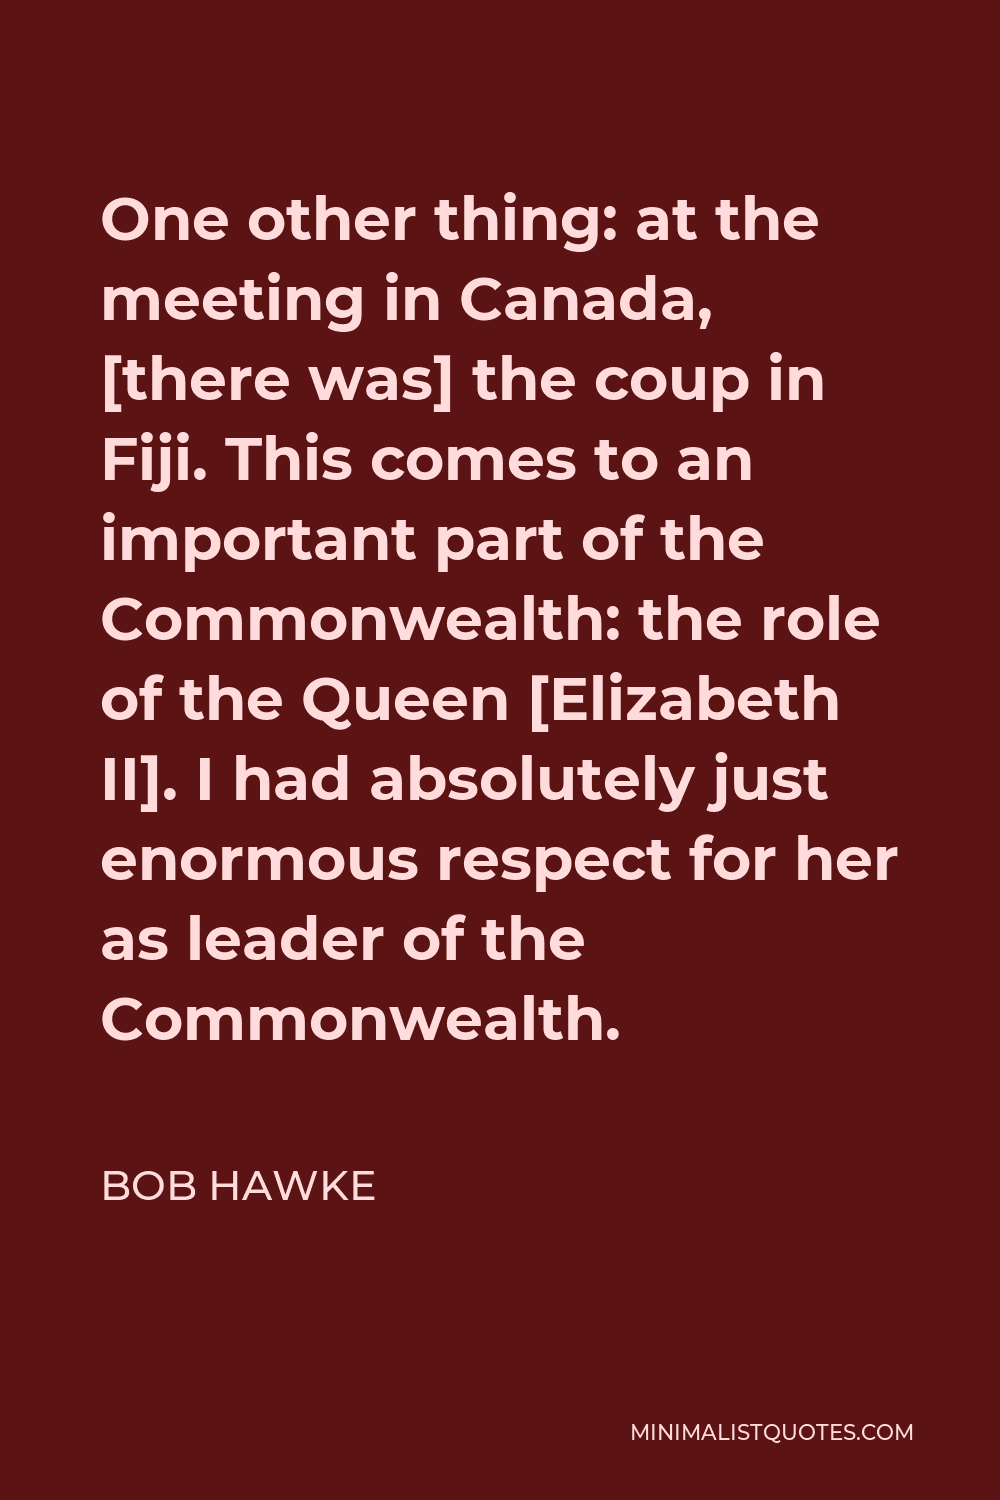 Bob Hawke Quote - One other thing: at the meeting in Canada, [there was] the coup in Fiji. This comes to an important part of the Commonwealth: the role of the Queen [Elizabeth II]. I had absolutely just enormous respect for her as leader of the Commonwealth.